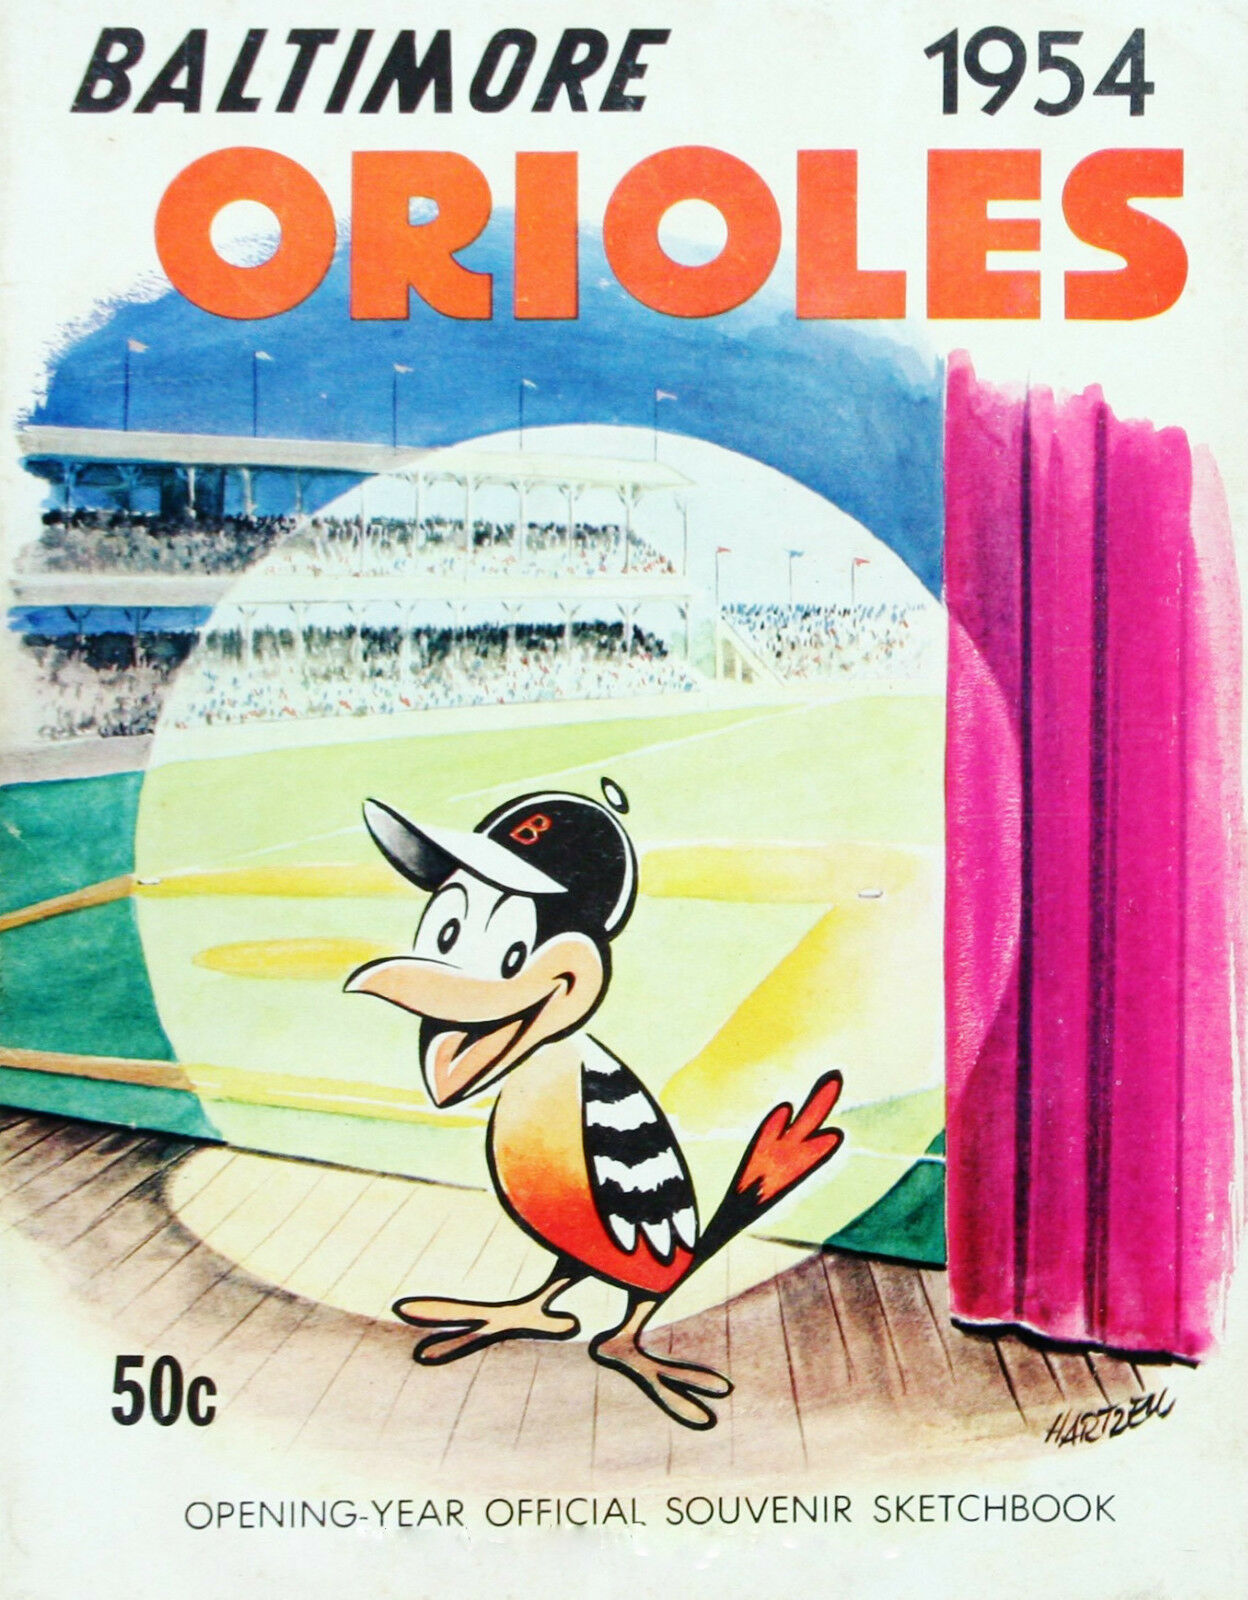 1954 BALTIMORE ORIOLES FIRST YEAR OFFICIAL PROGRAM PHOTO Glossy